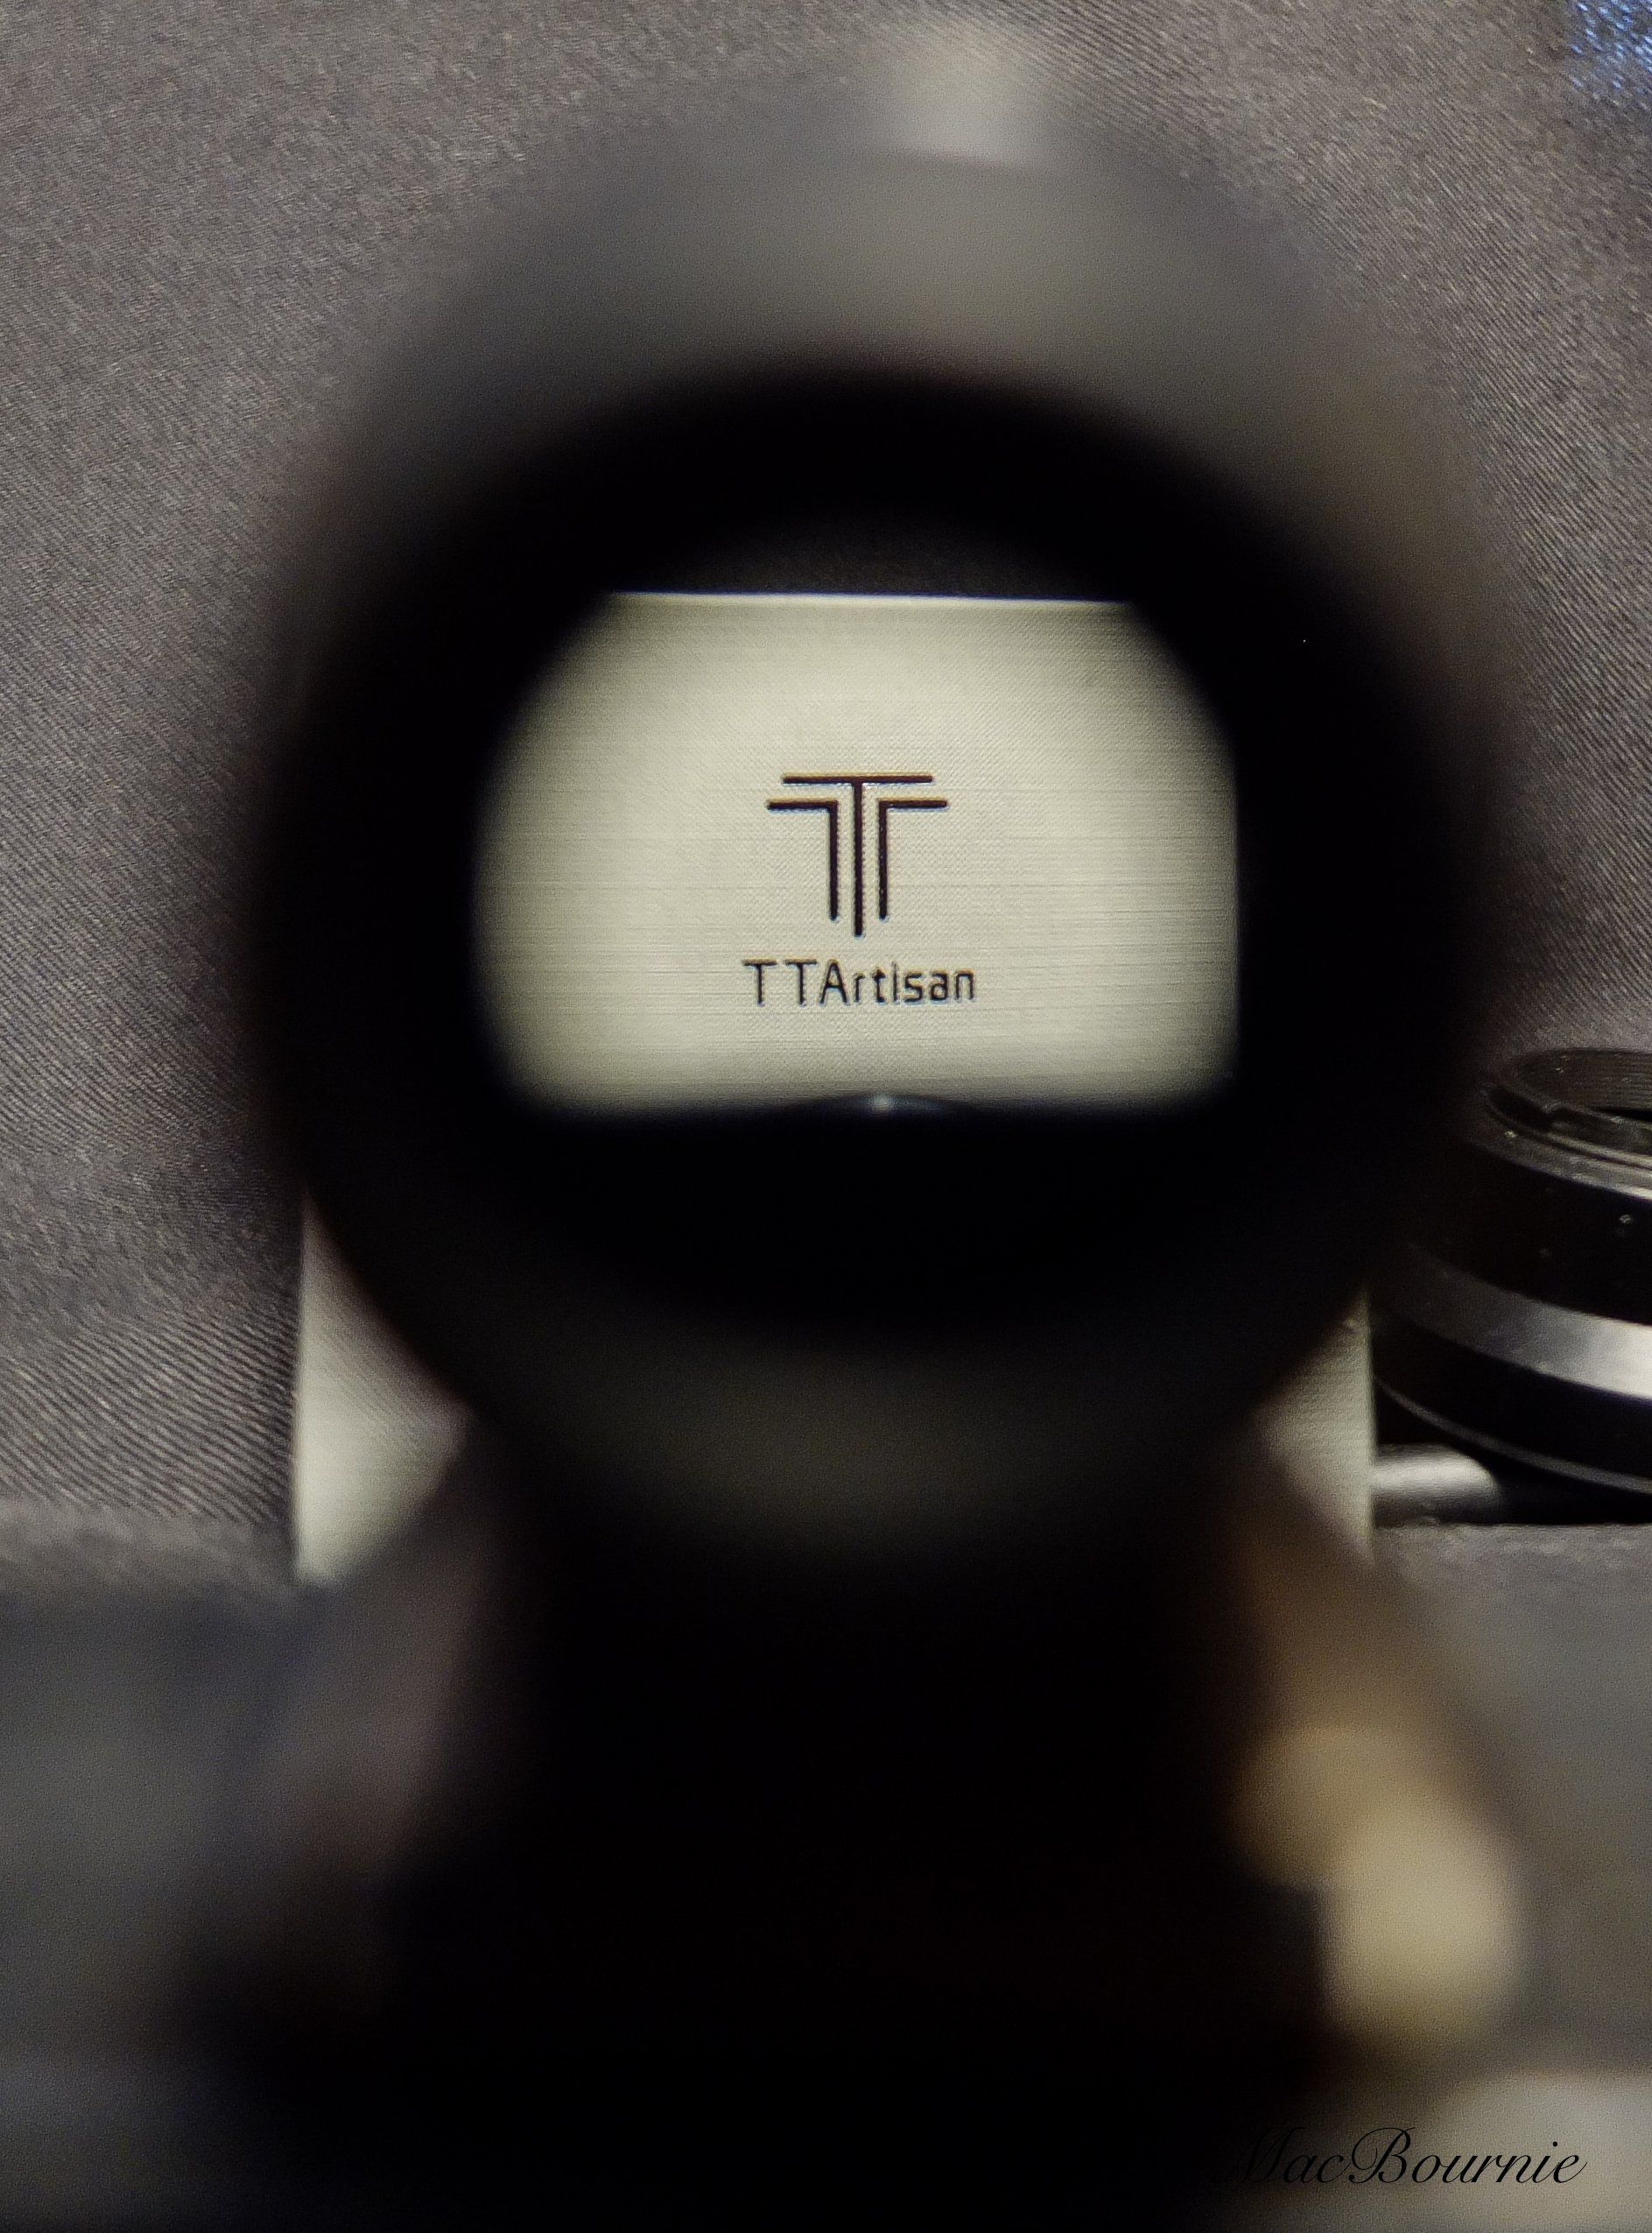 Looking through the viewfinder of the 28mm TTArtisan viewfinder.